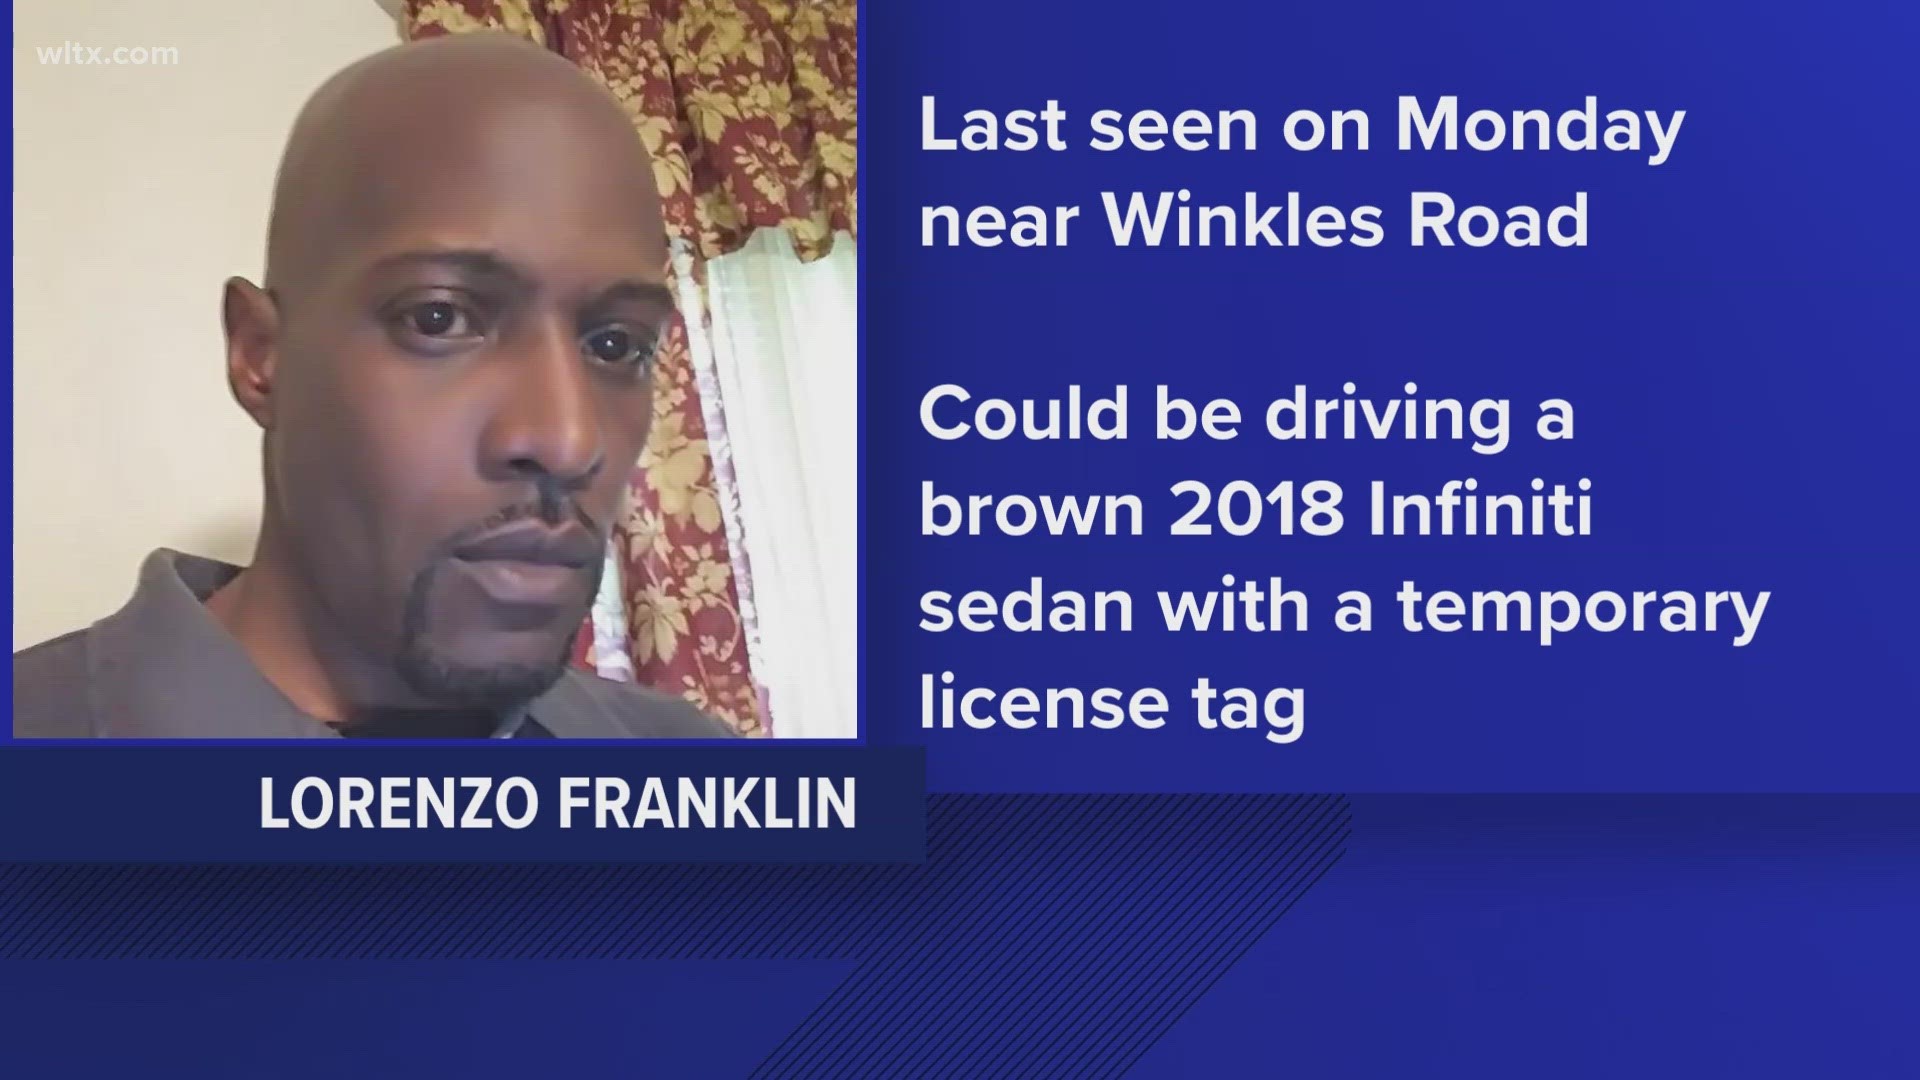 Police say Lorenzo Franklin was last seen Monday in the Winkles Road area.